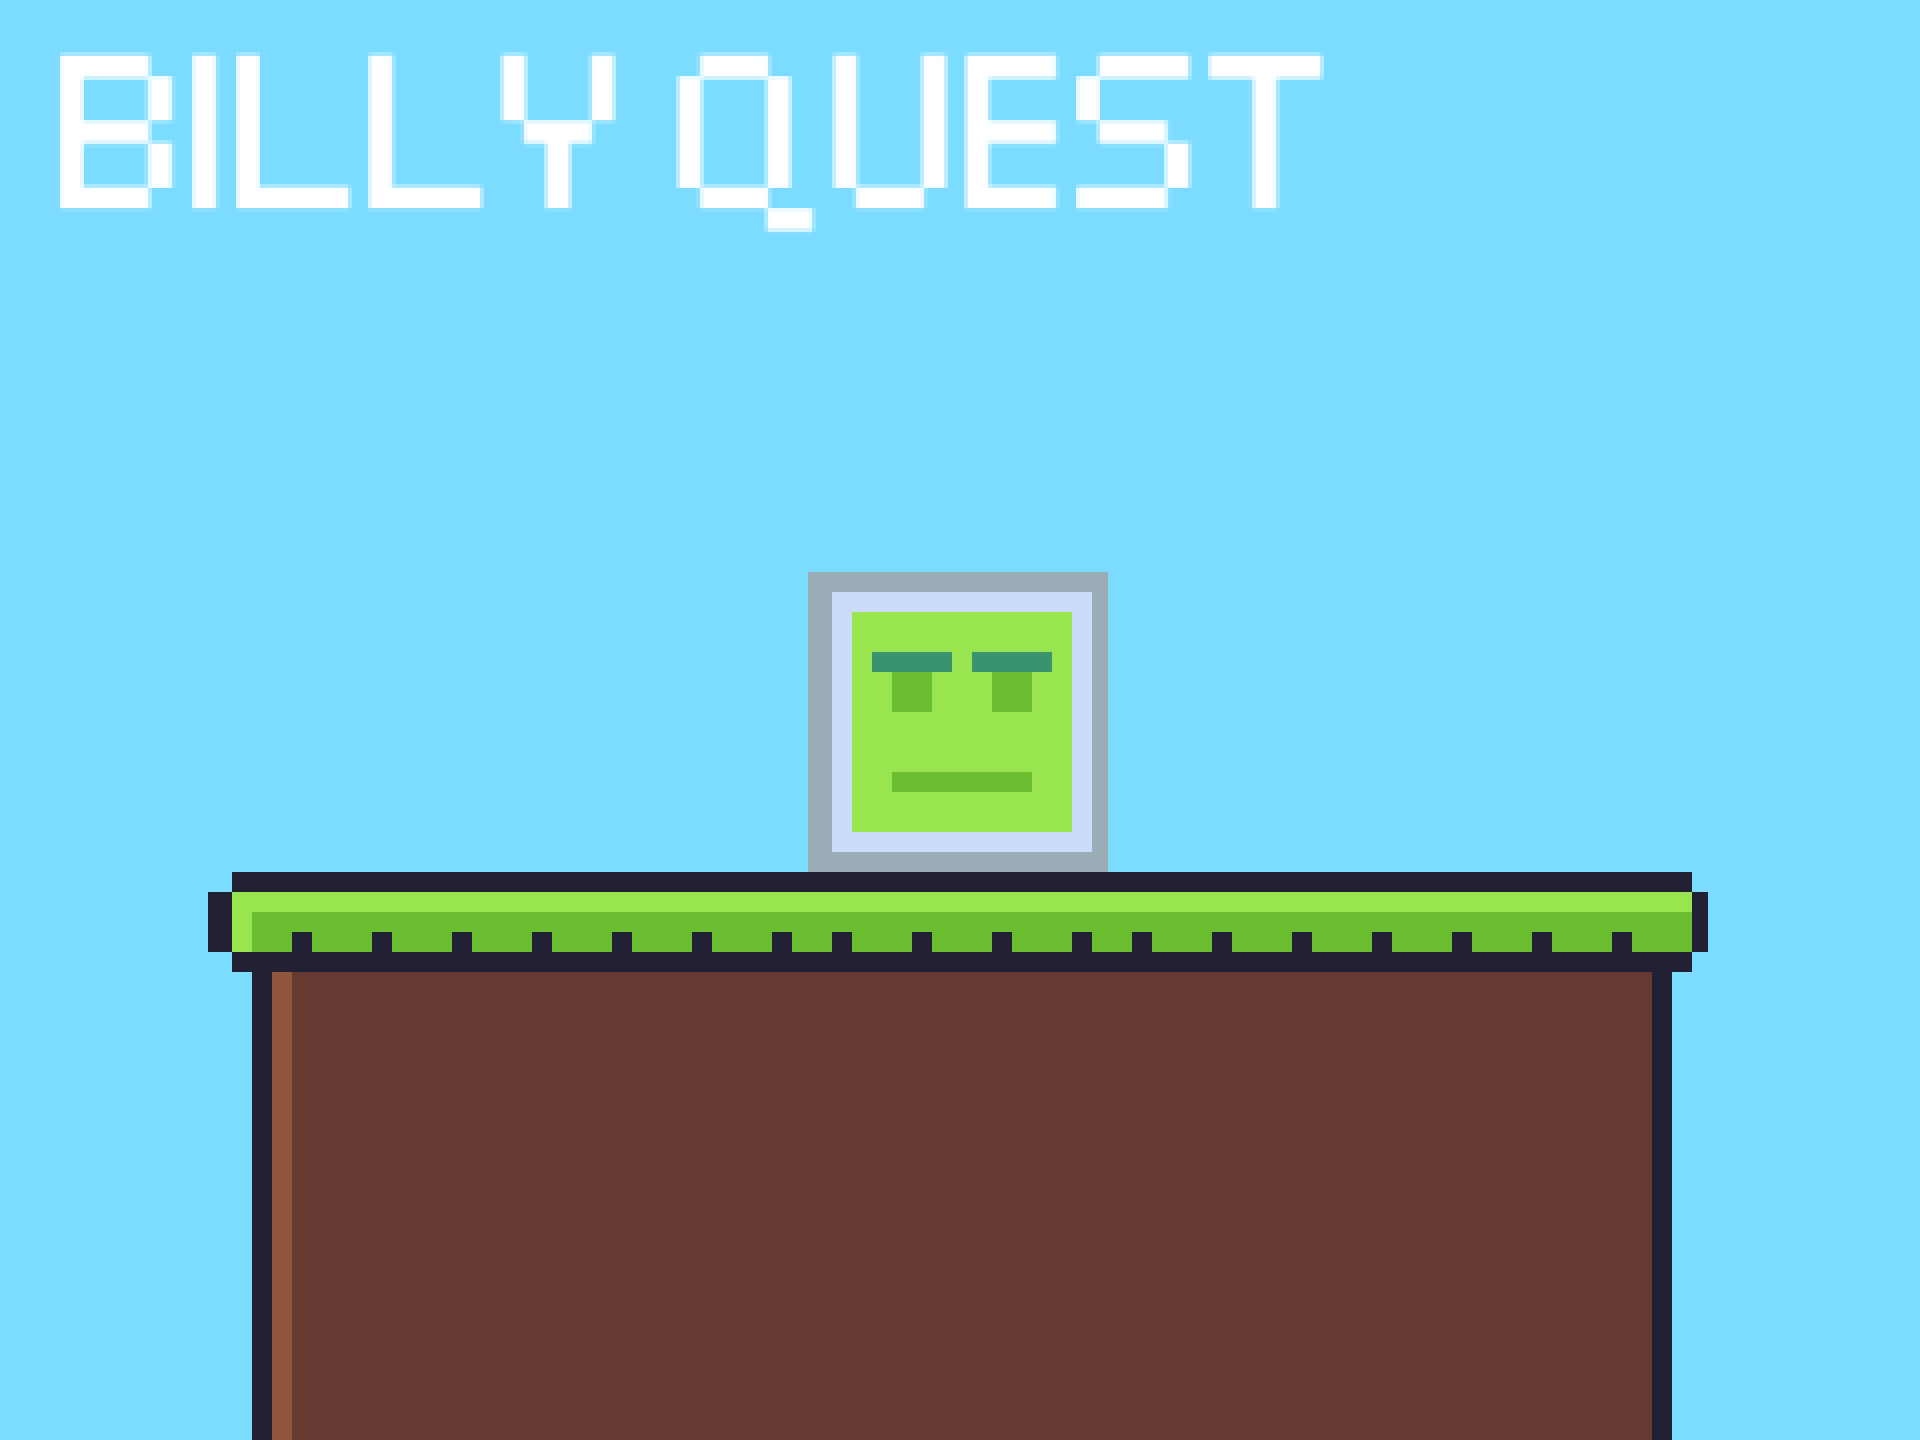 Billy Quest